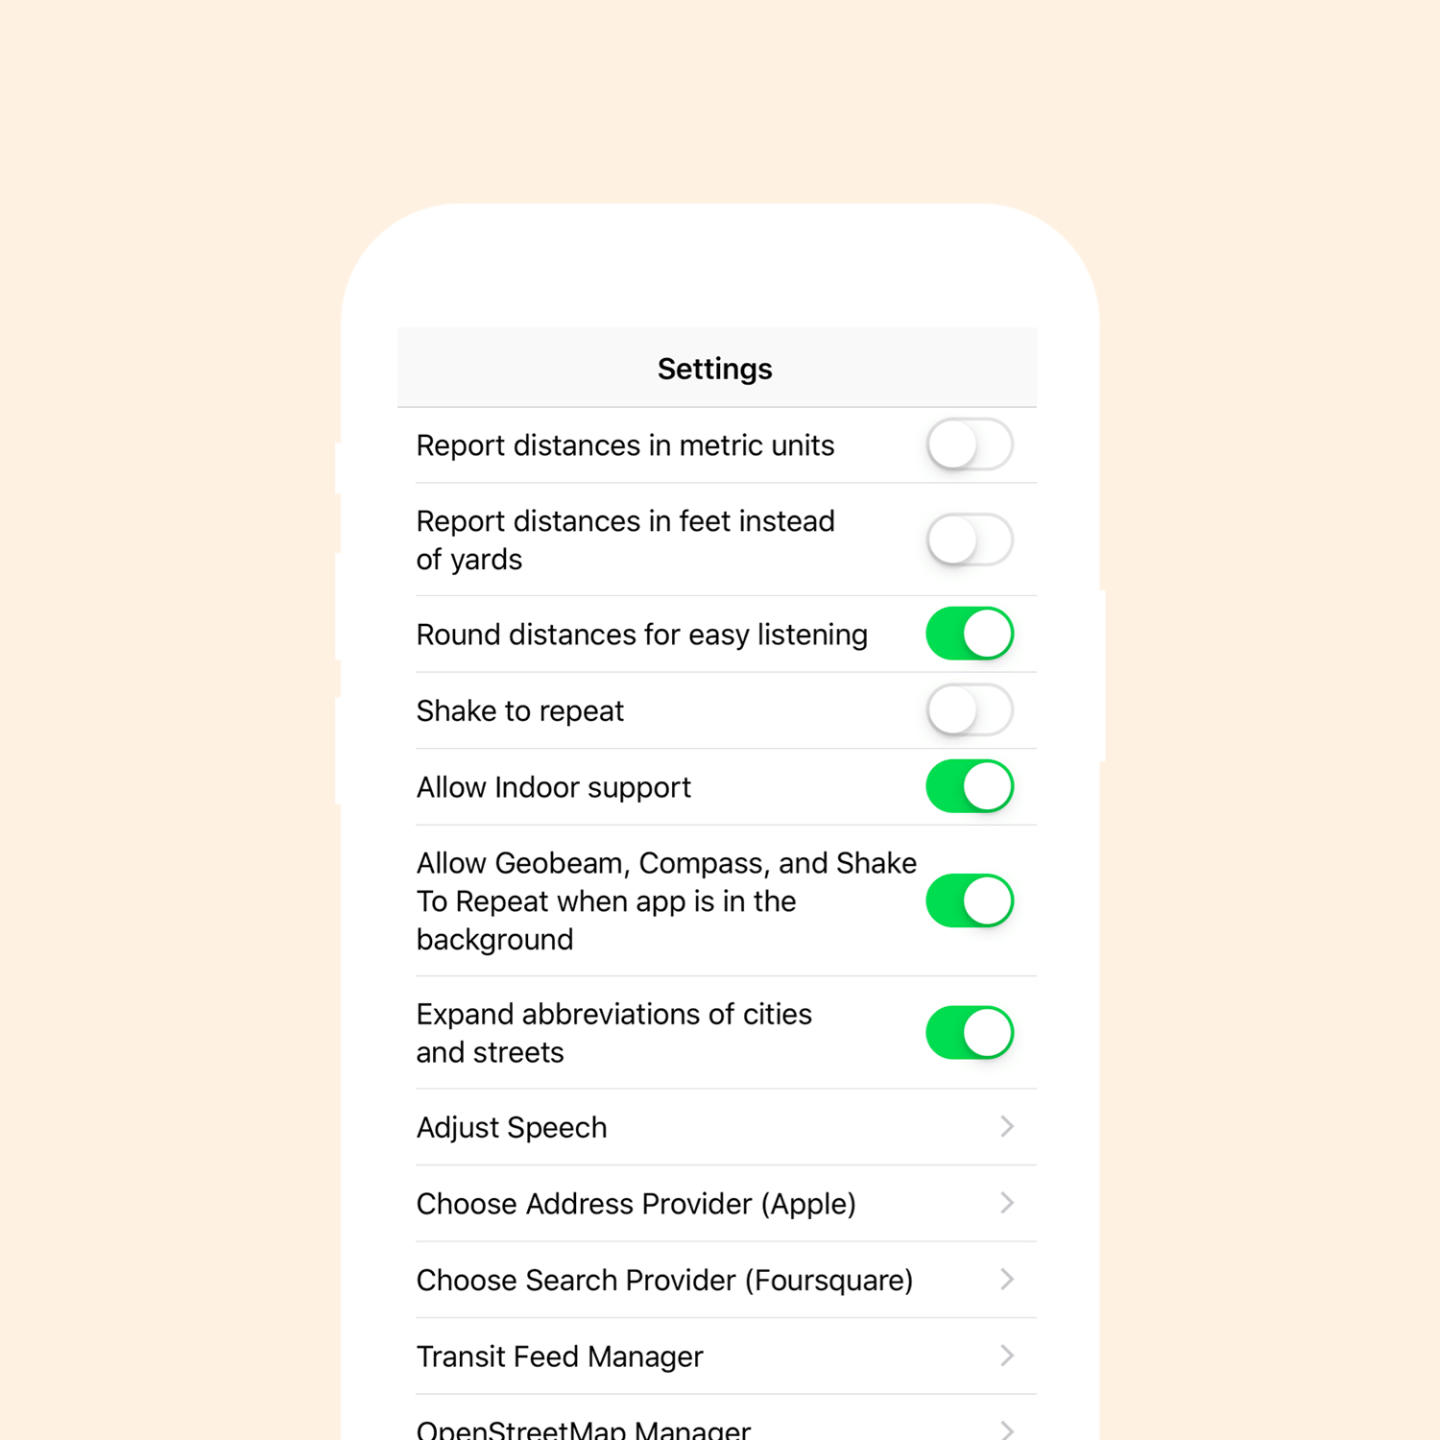 Image of a screen in the APH app. Shows settings which can be toggled such as "report distance in feet instead of yards" and "allow indoor support".